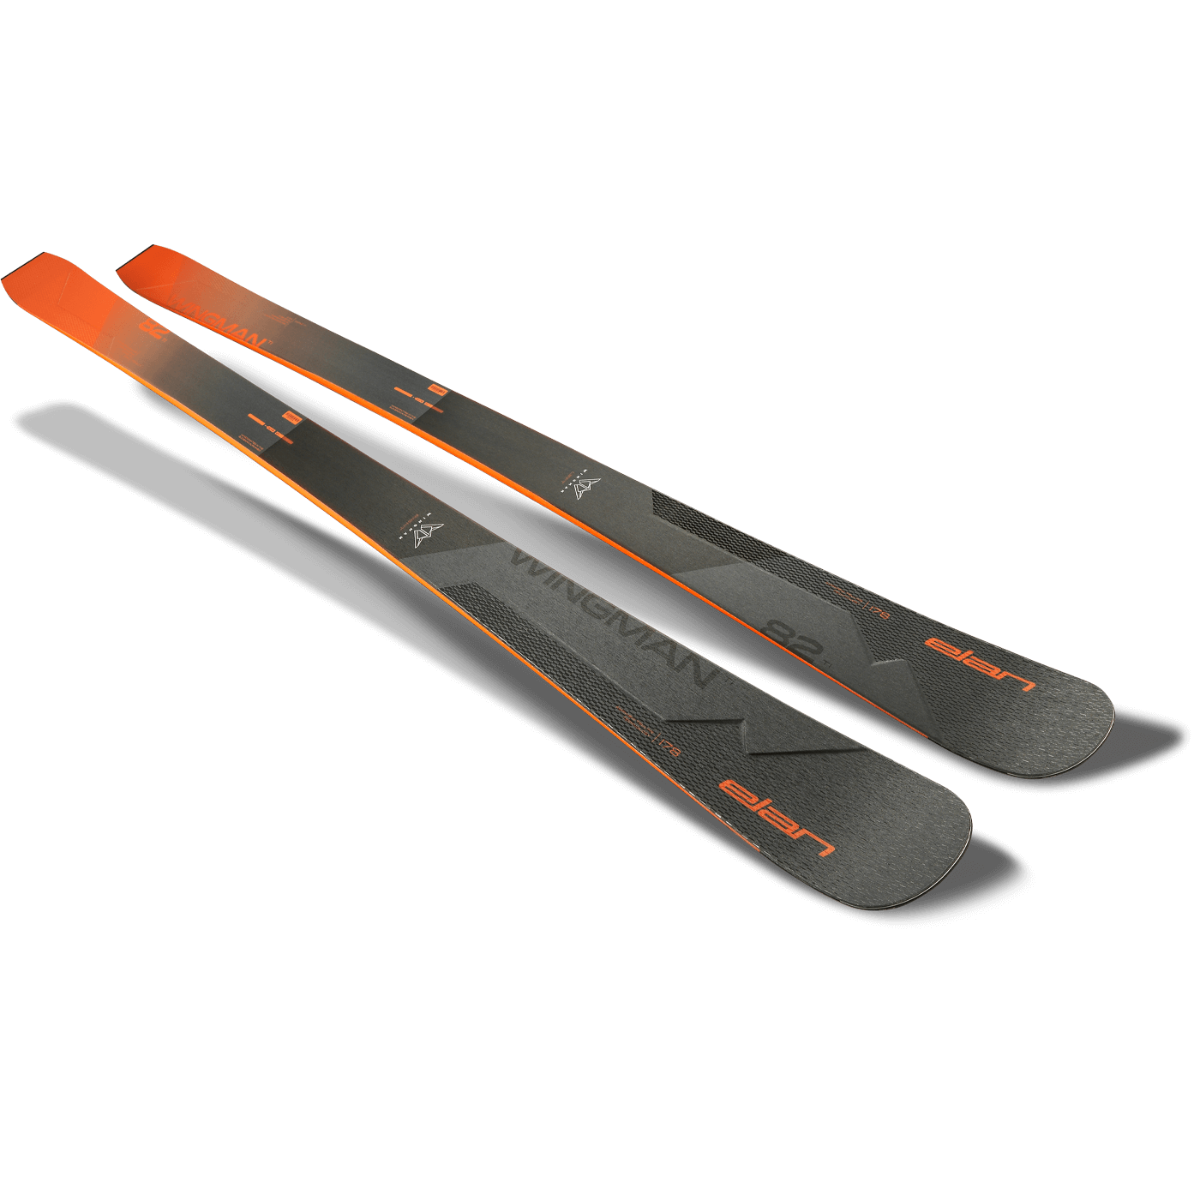 Precise edge grip Better edge to edge quickness Quick Turn Entry & Exit Powerful Rebound Smooth Ride Skiers who spend a majority of time on groomed snow, but want the ability to ski variable snow